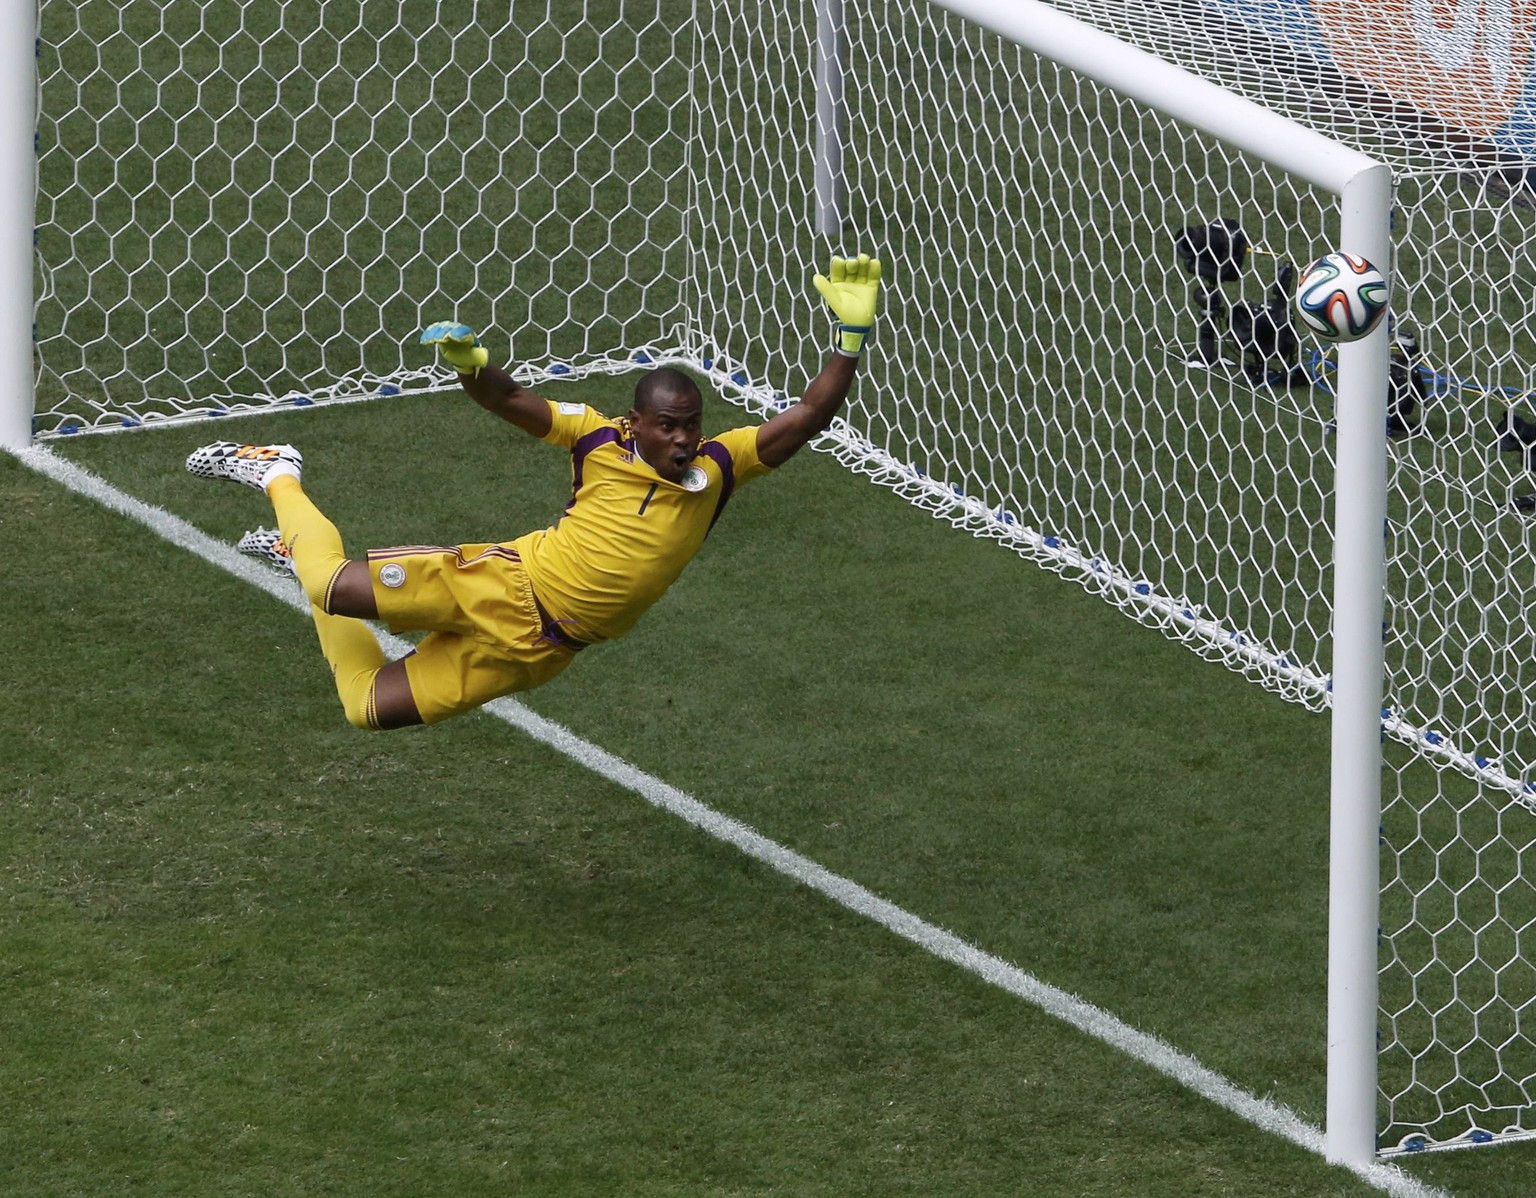 Nigeria&#039;s goalkeeper Vincent Enyeama jumps to make a save on a shot at goal by France&#039;s Paul Pogba (unseen) during their 2014 World Cup round of 16 game at the Brasilia national stadium in B ...